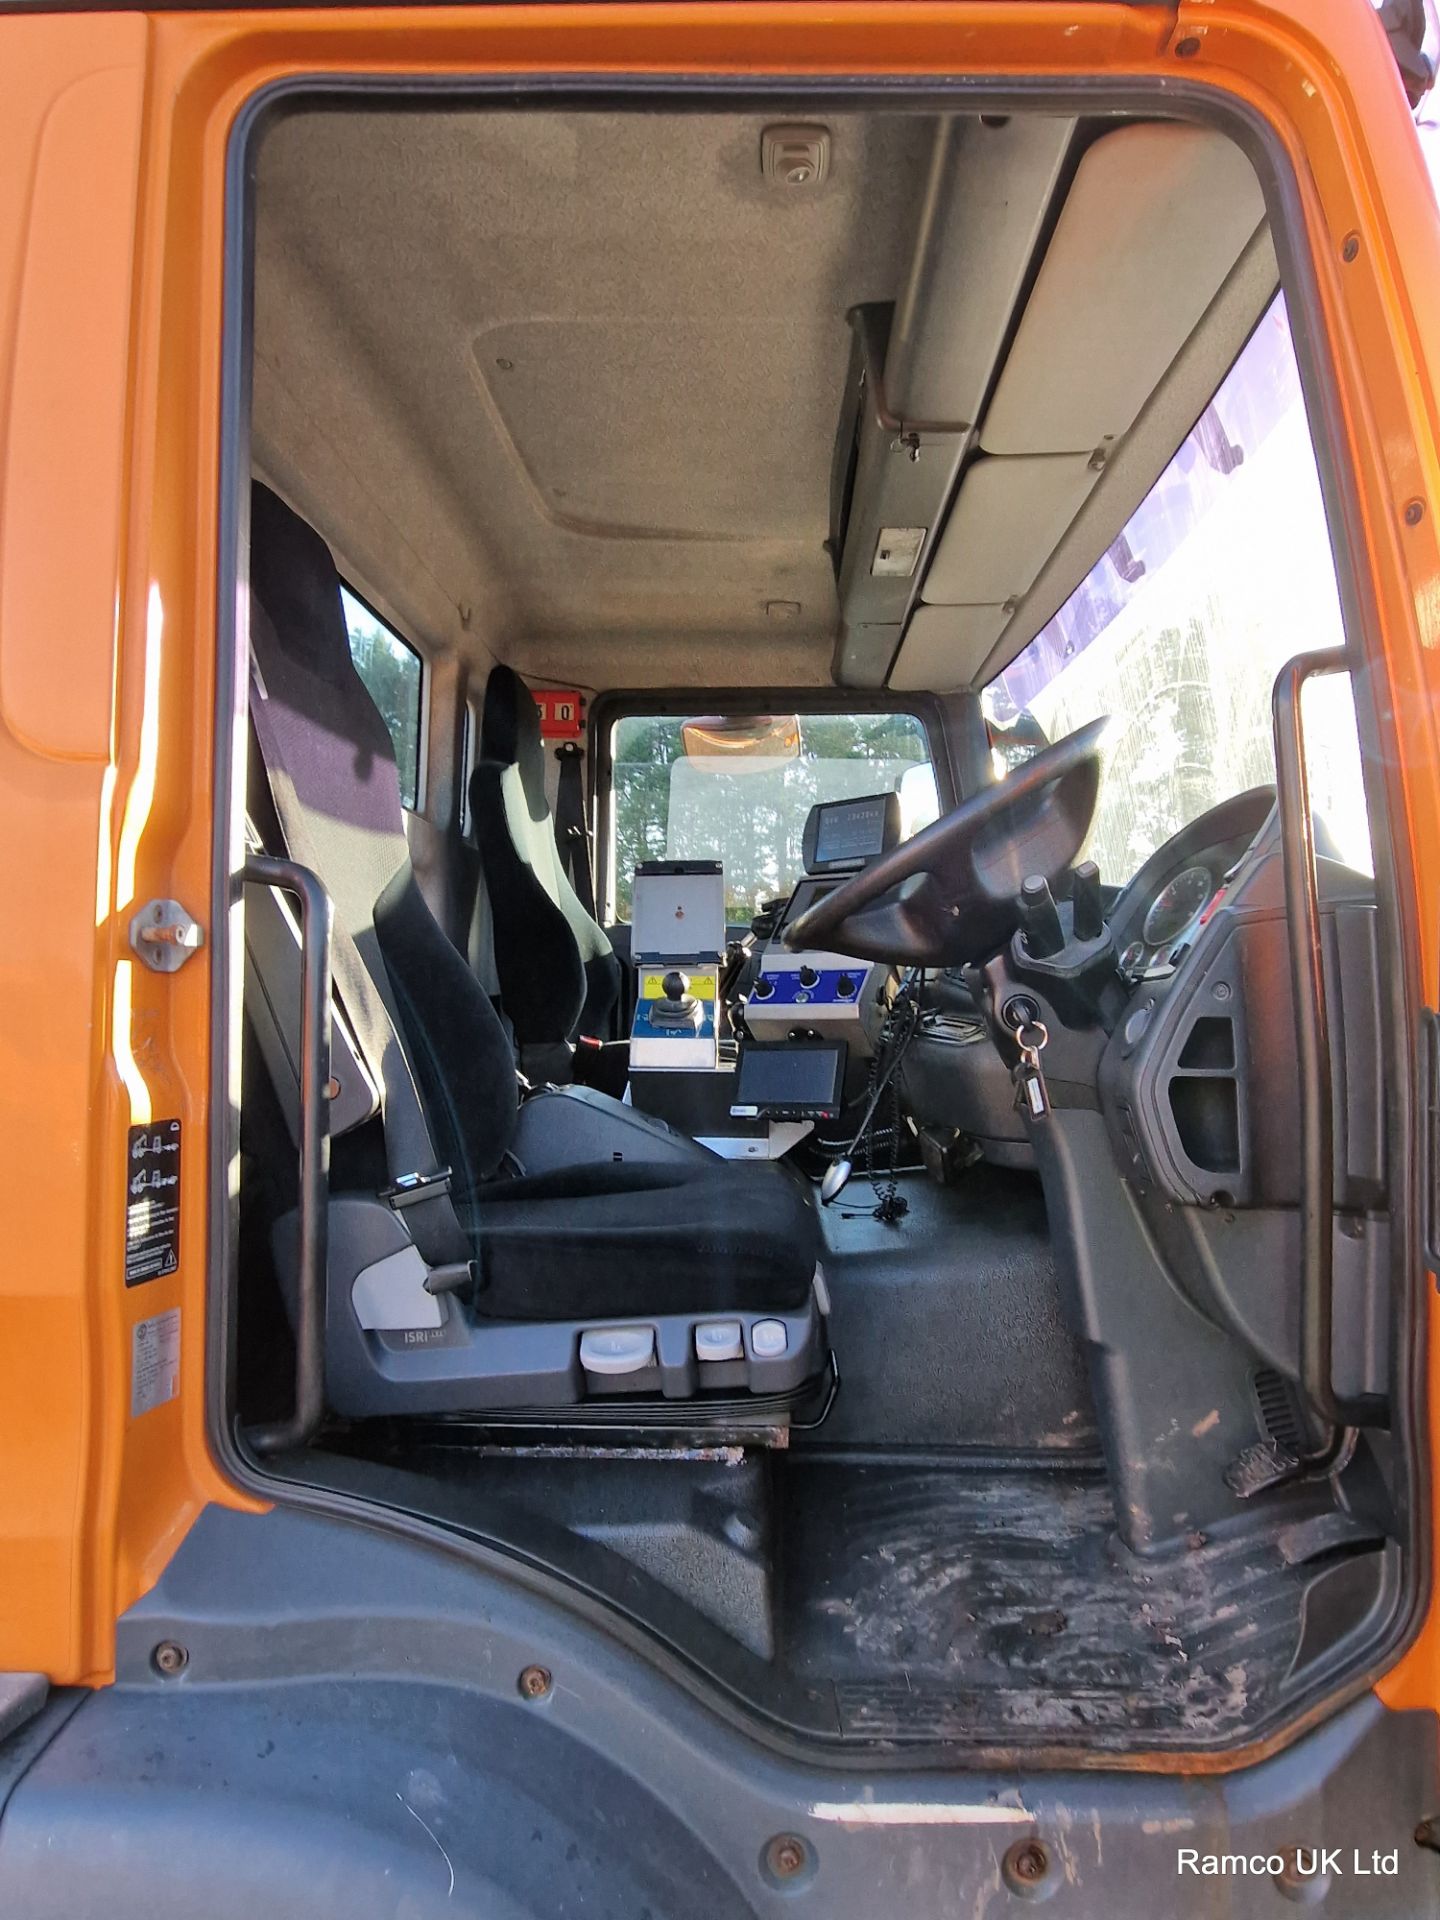 2009 (reg GN09 OUY) MAN TGM 26.330 6x4 with Romaquip wet gritter mount. - Image 10 of 15